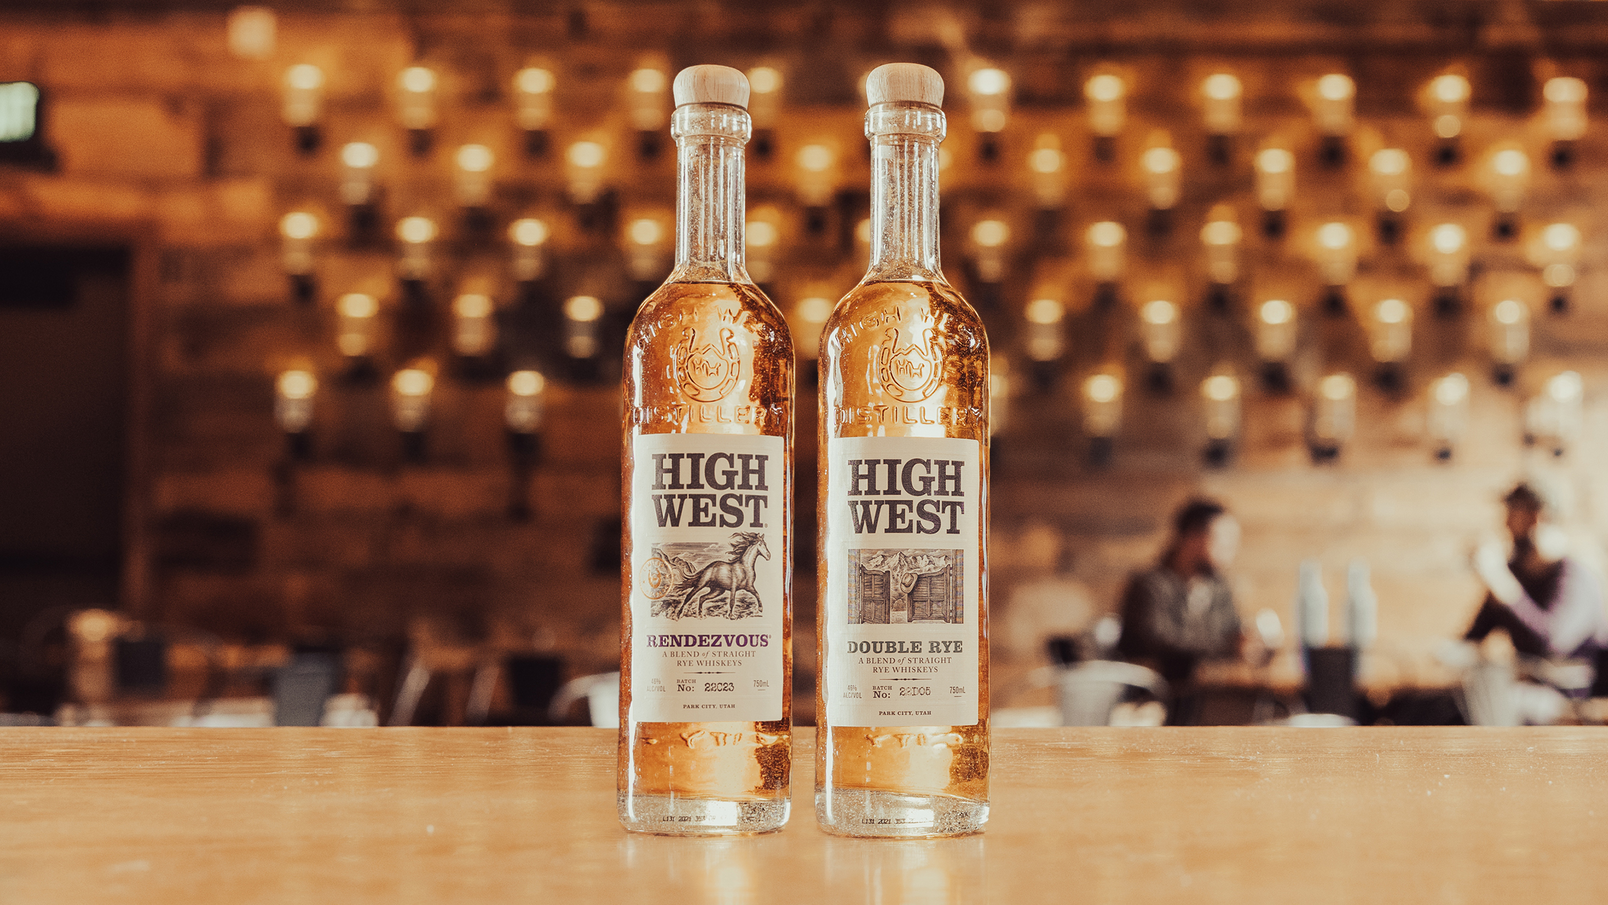 Two bottles of High West whiskey